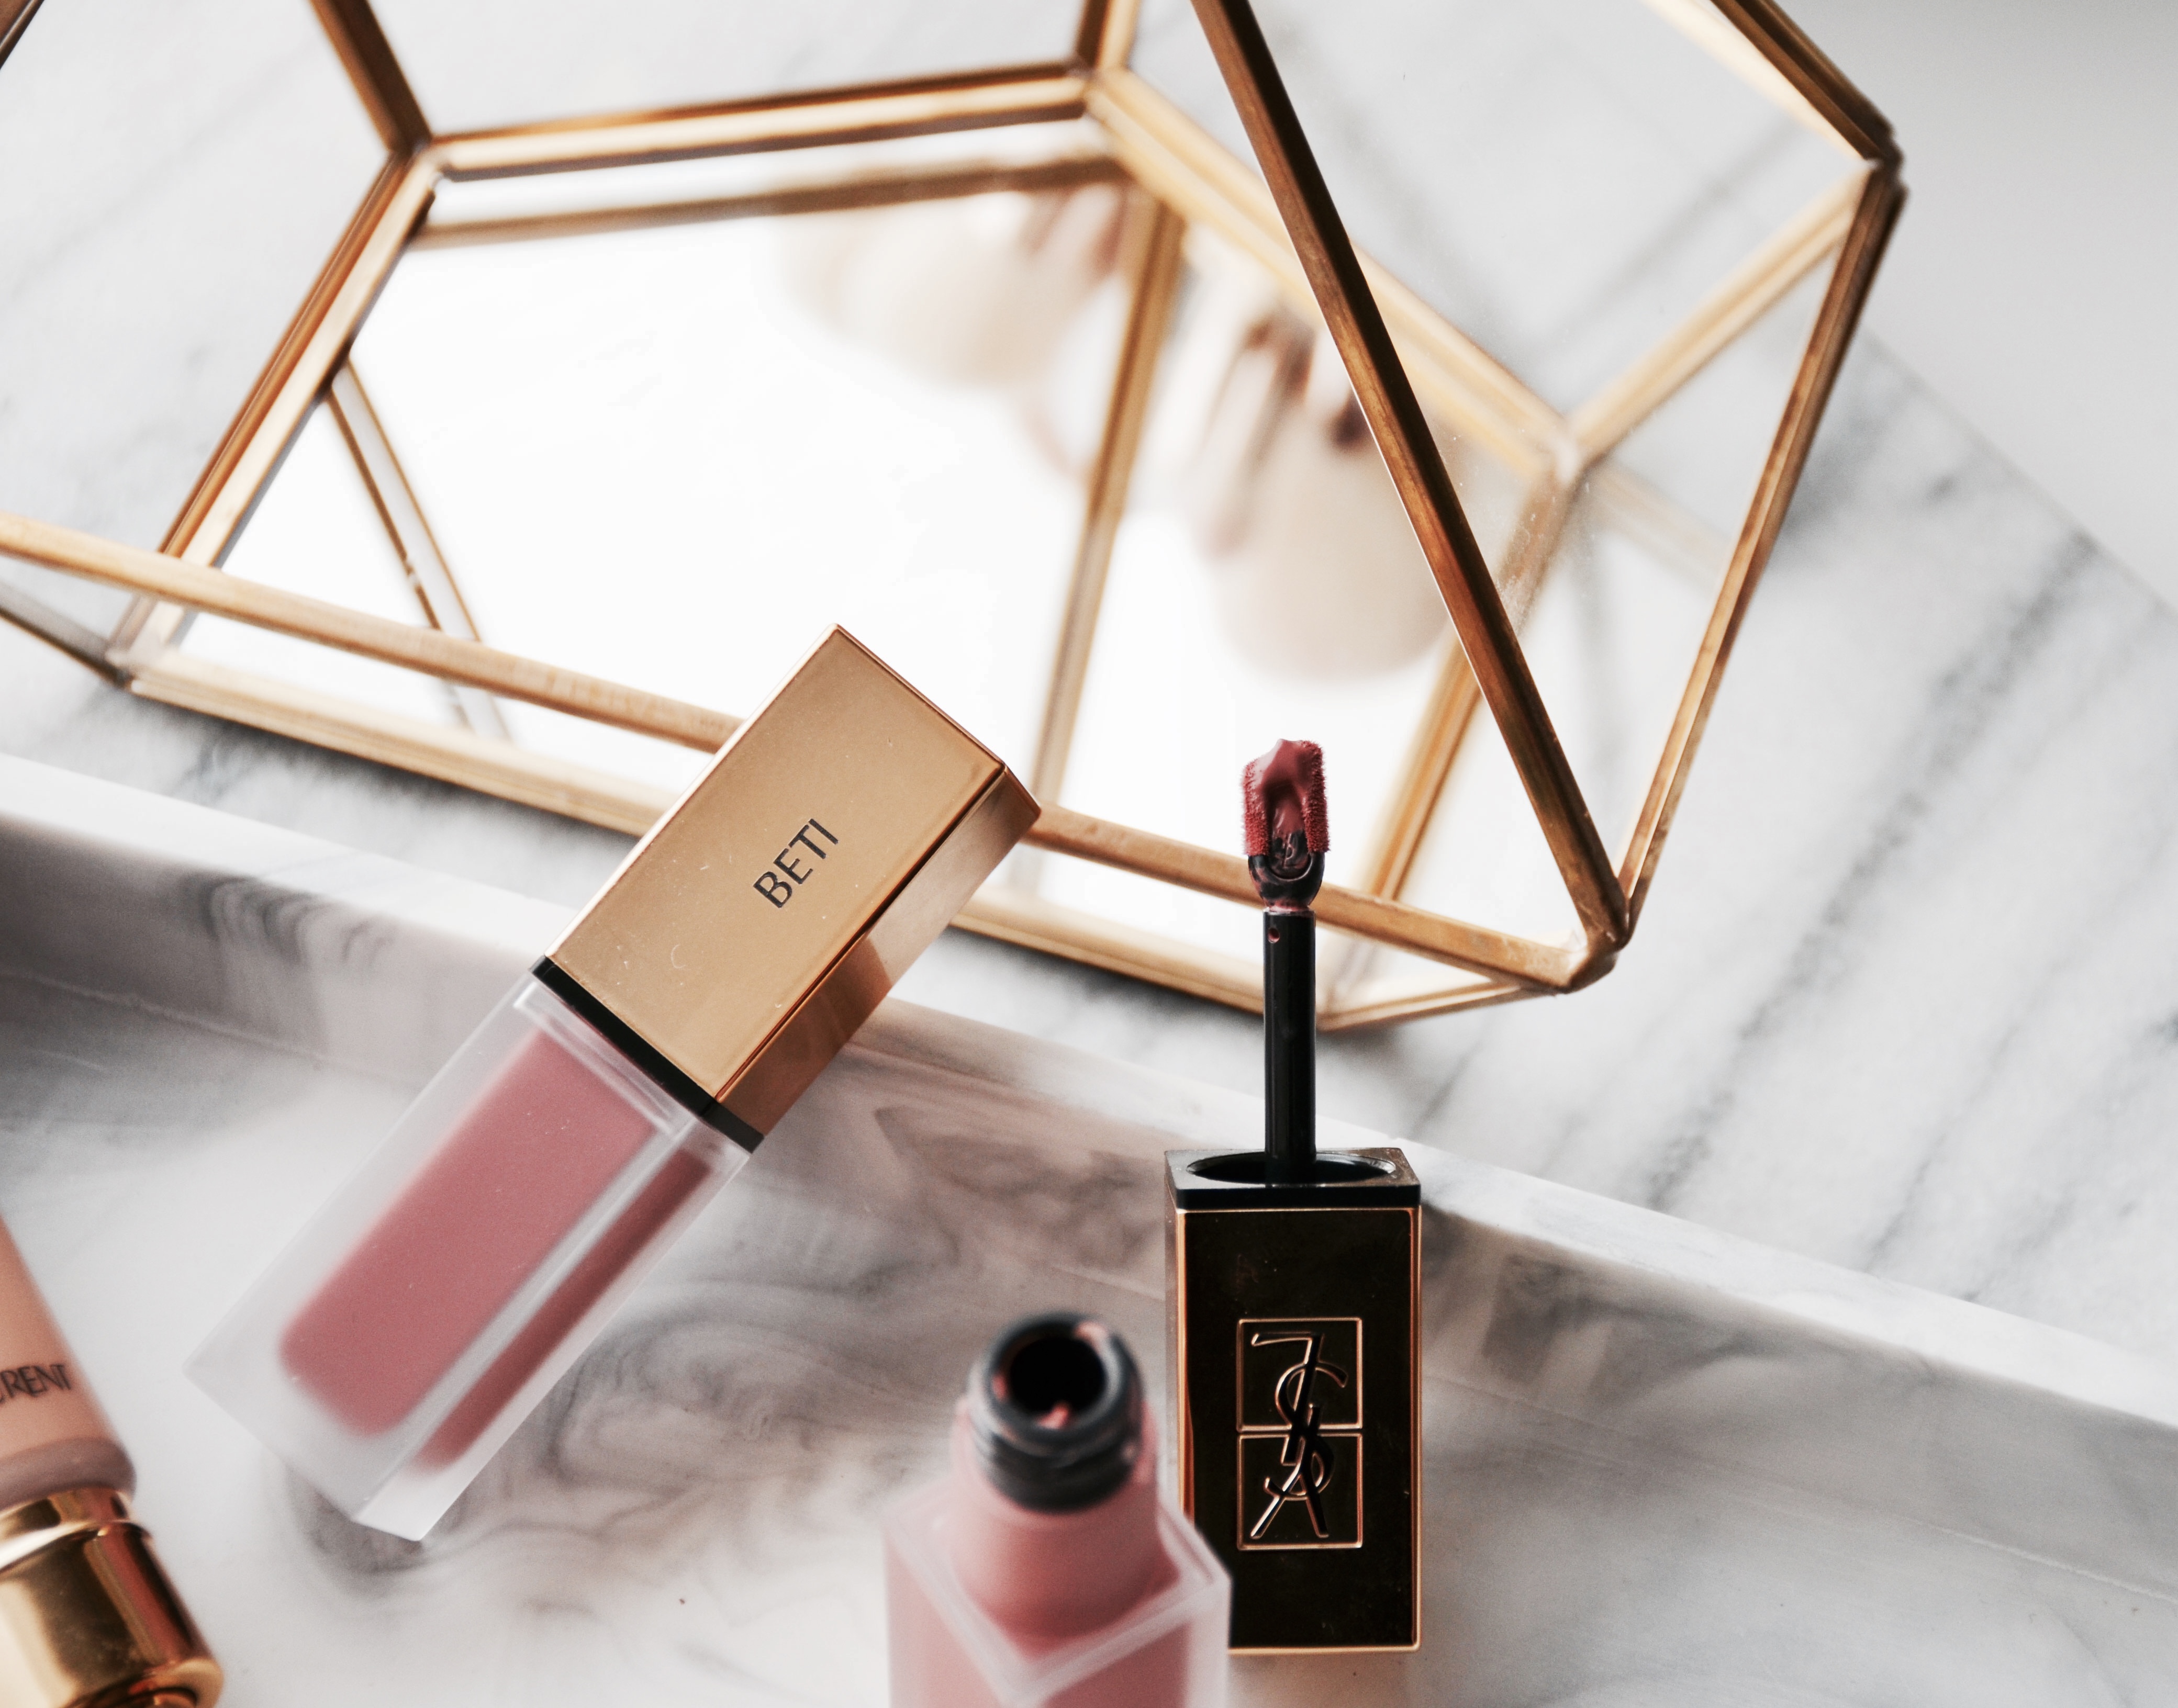 ysl touche eclat all in one glow makeupalley